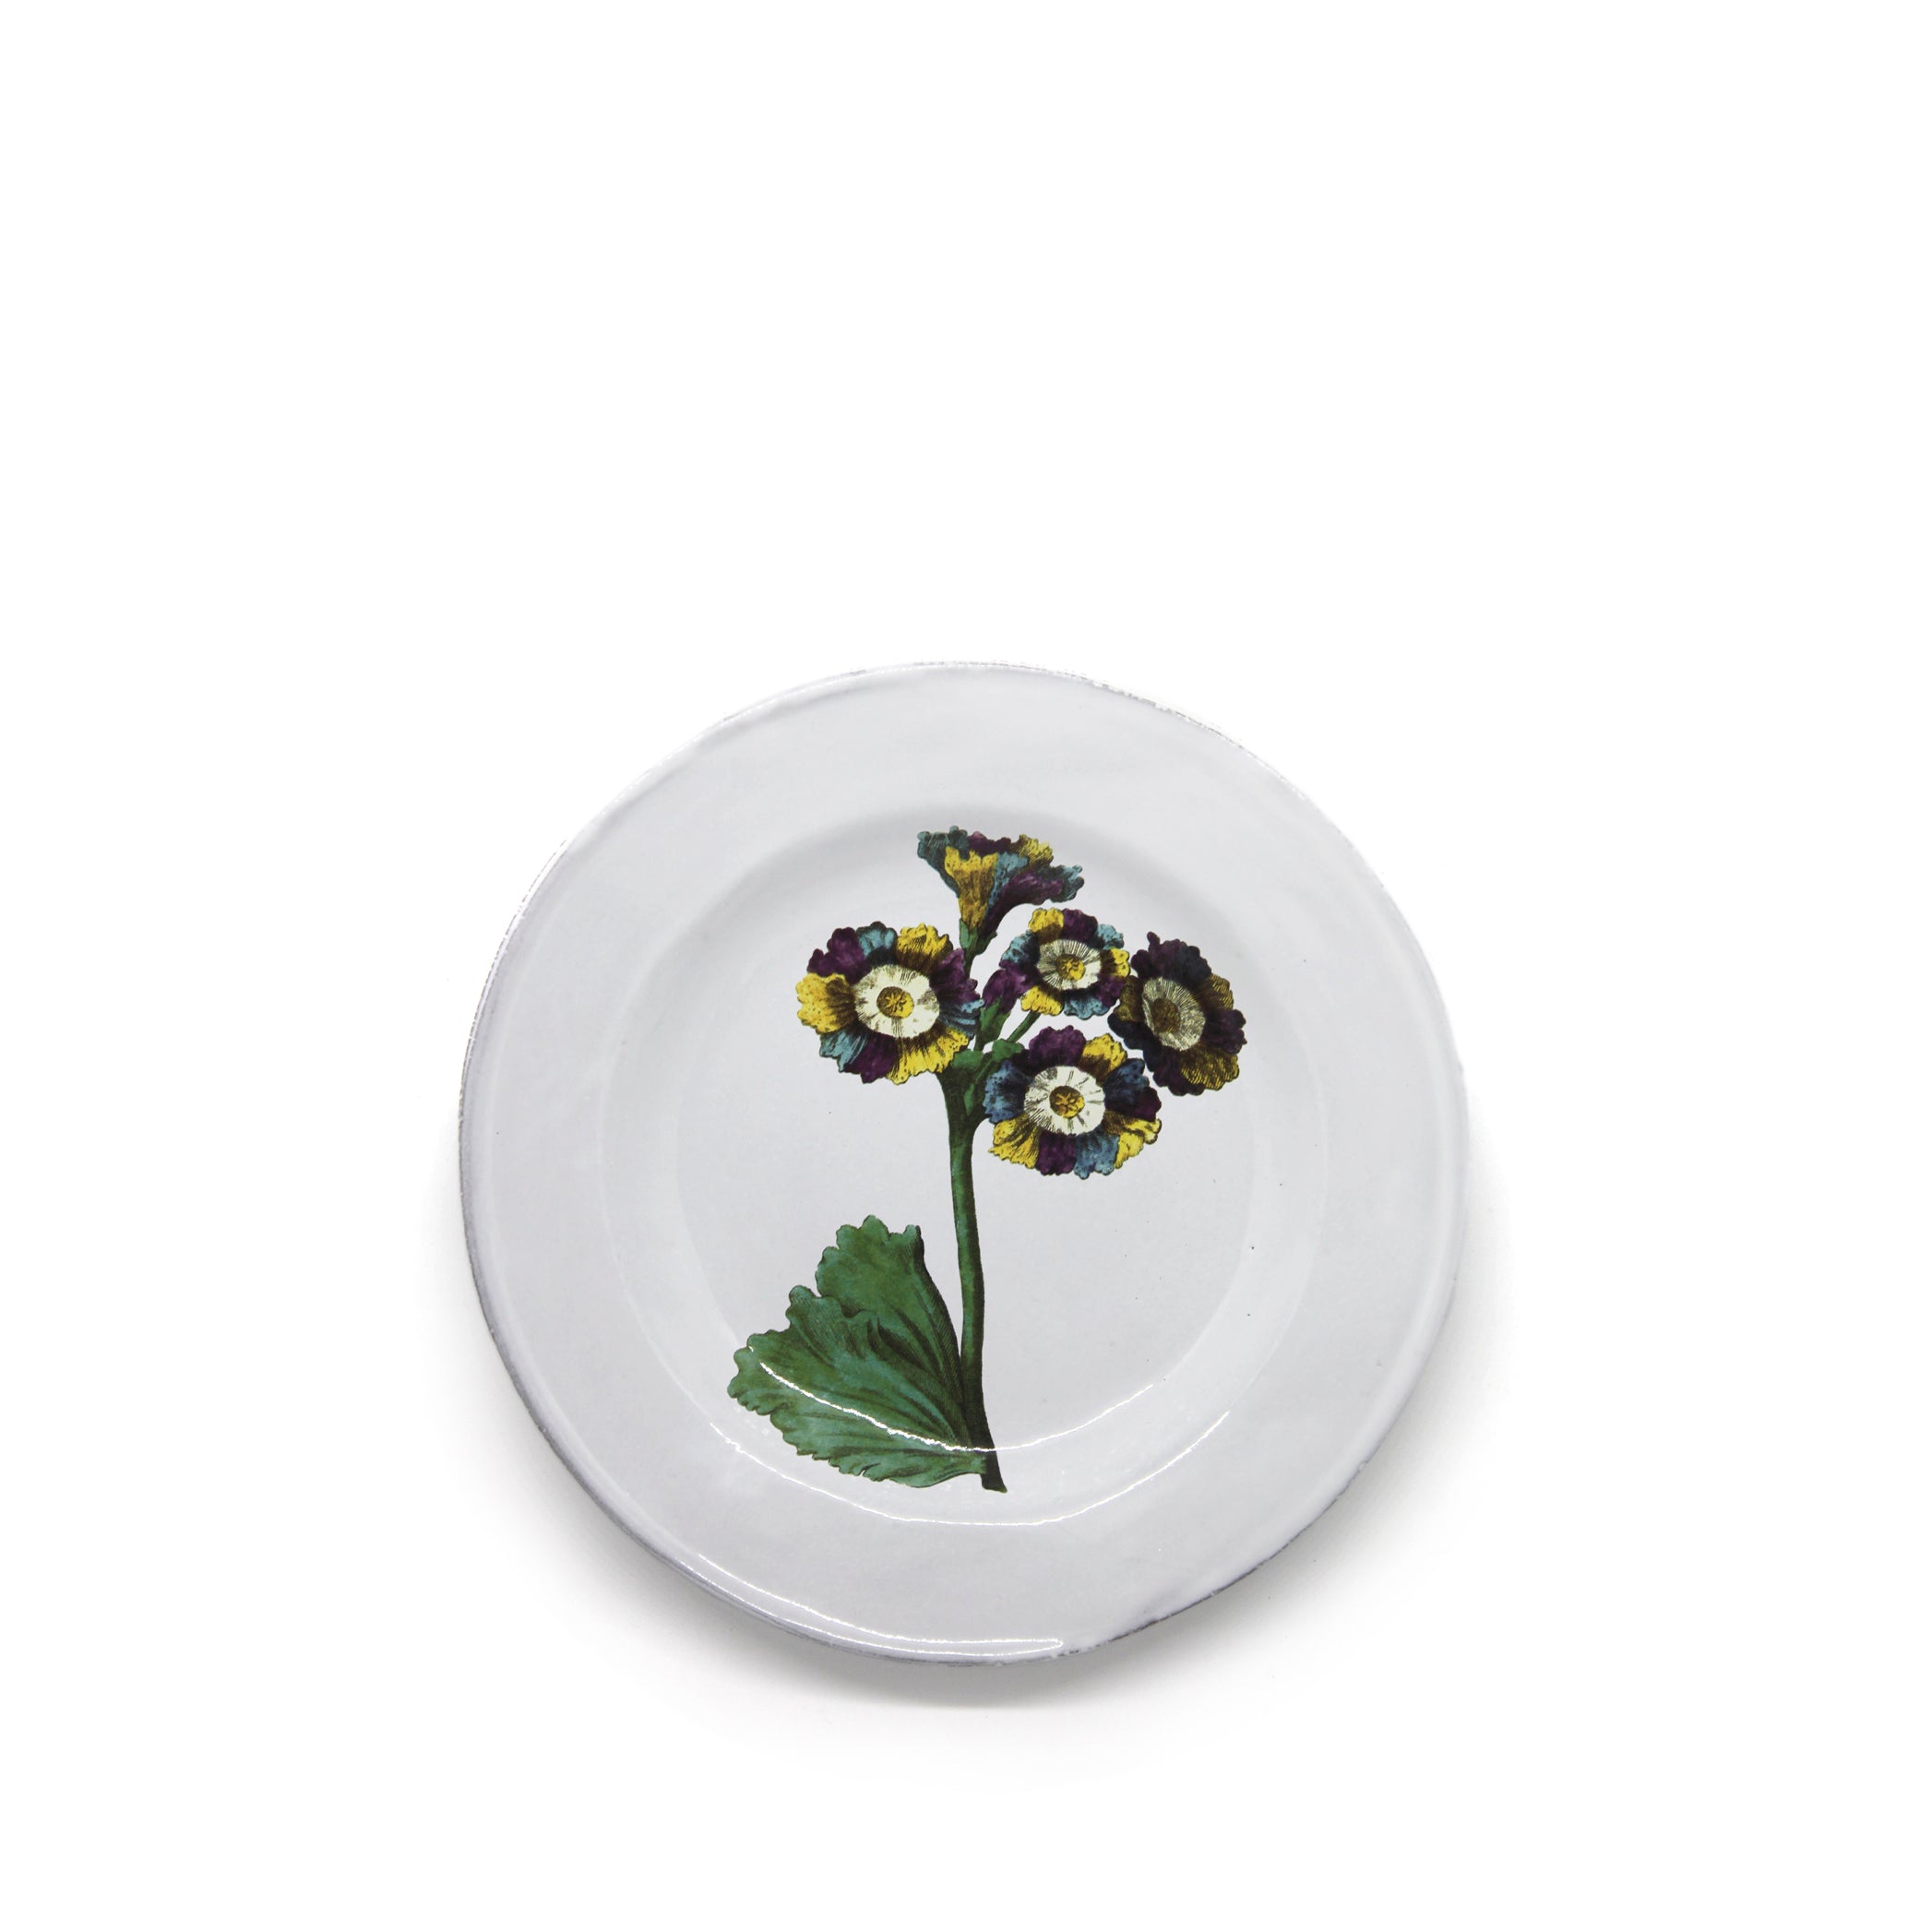 Lord Willoughby's Auricula Flower Plate by Astier de Villatte, 22cm